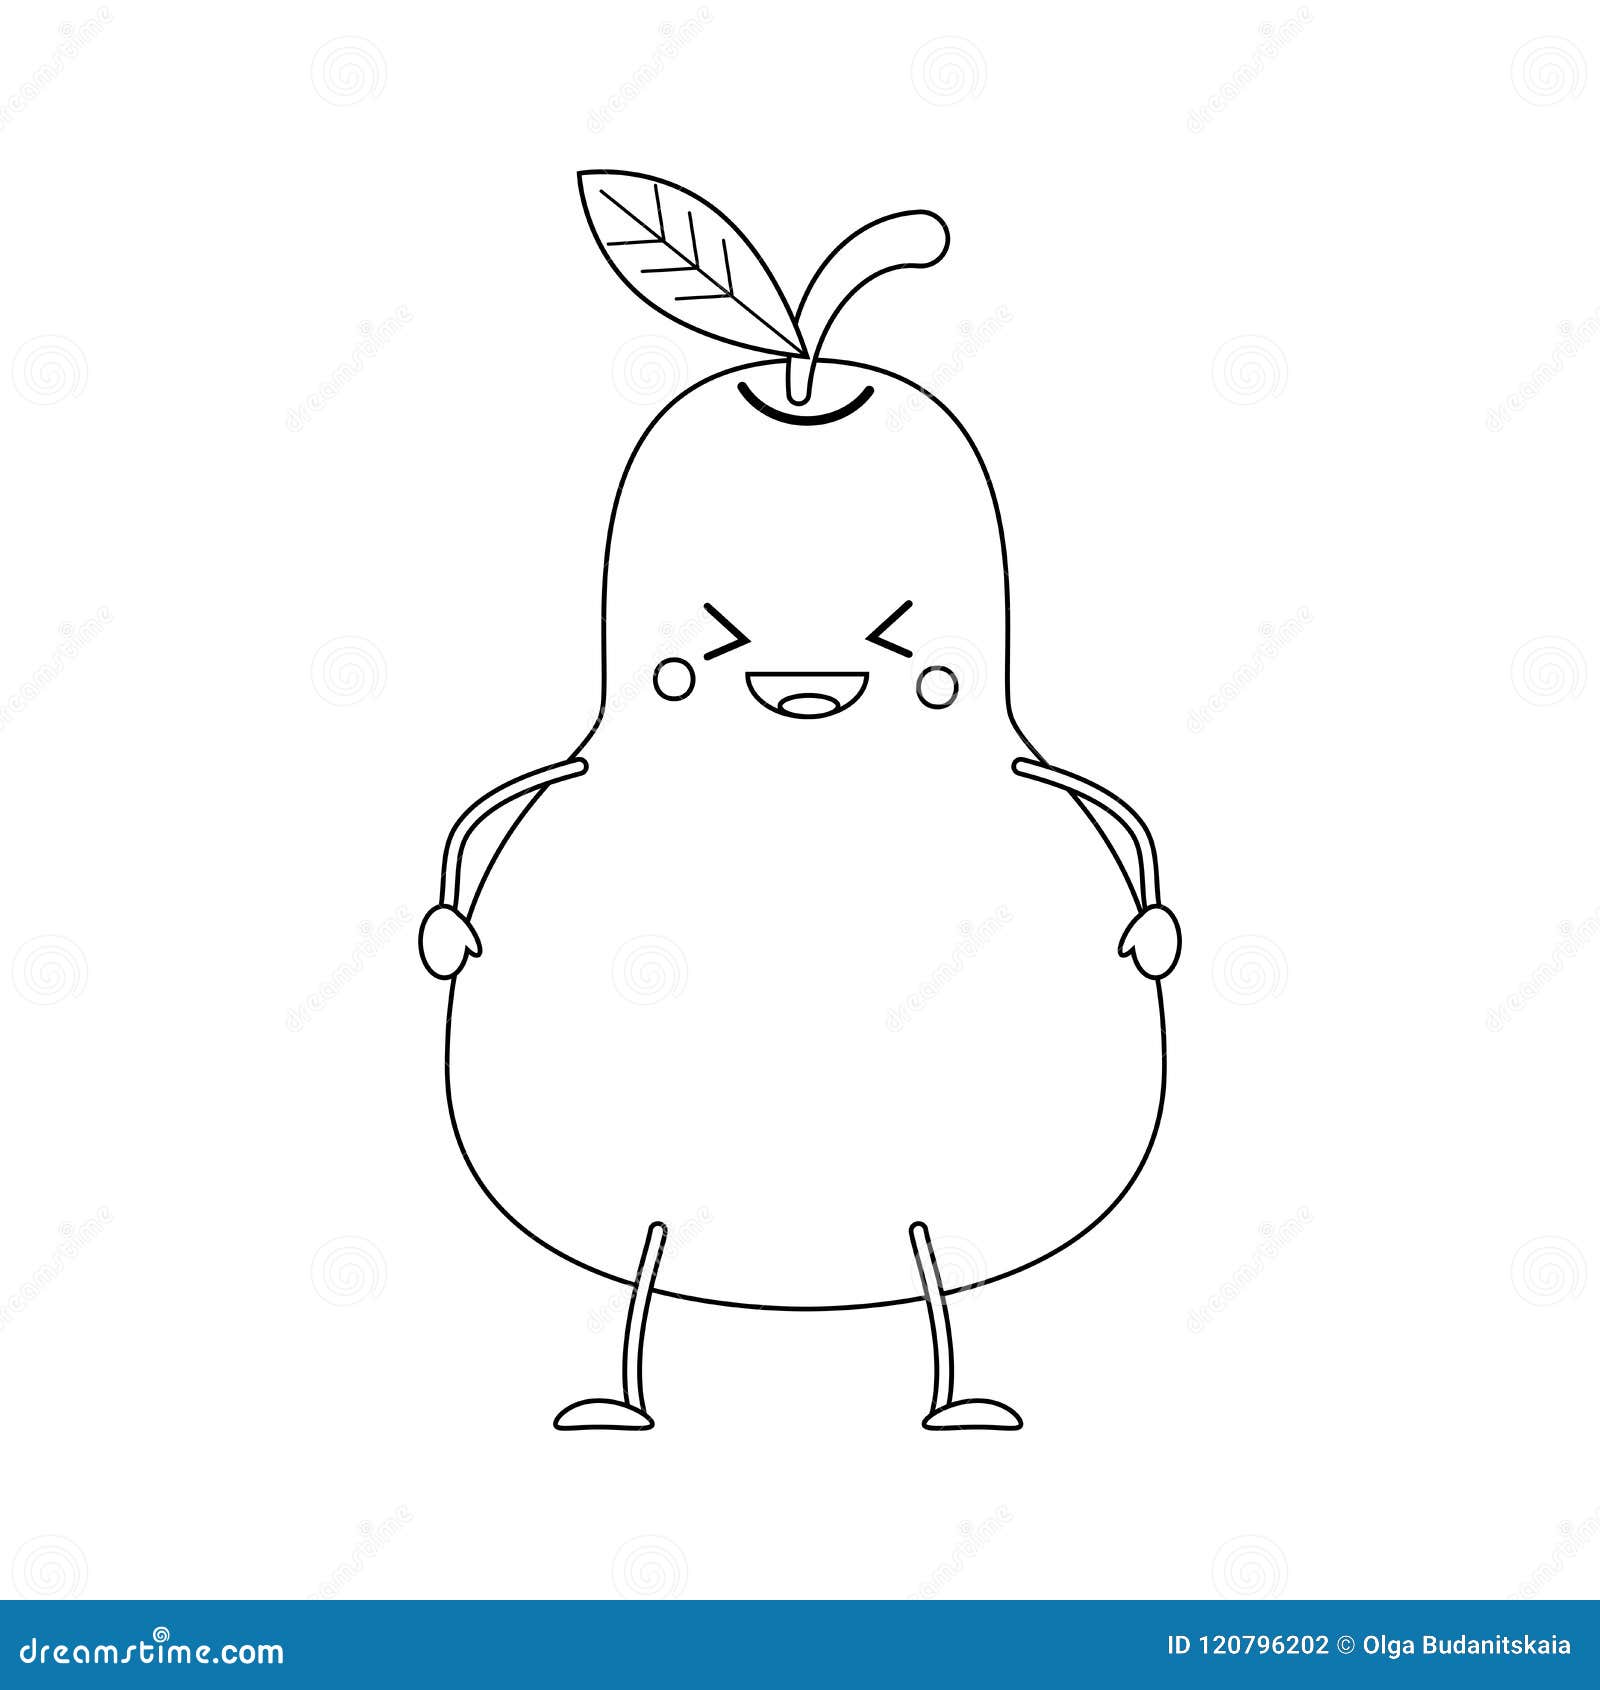 Colorless Funny Cartoon Pear. Stock Vector - Illustration of black